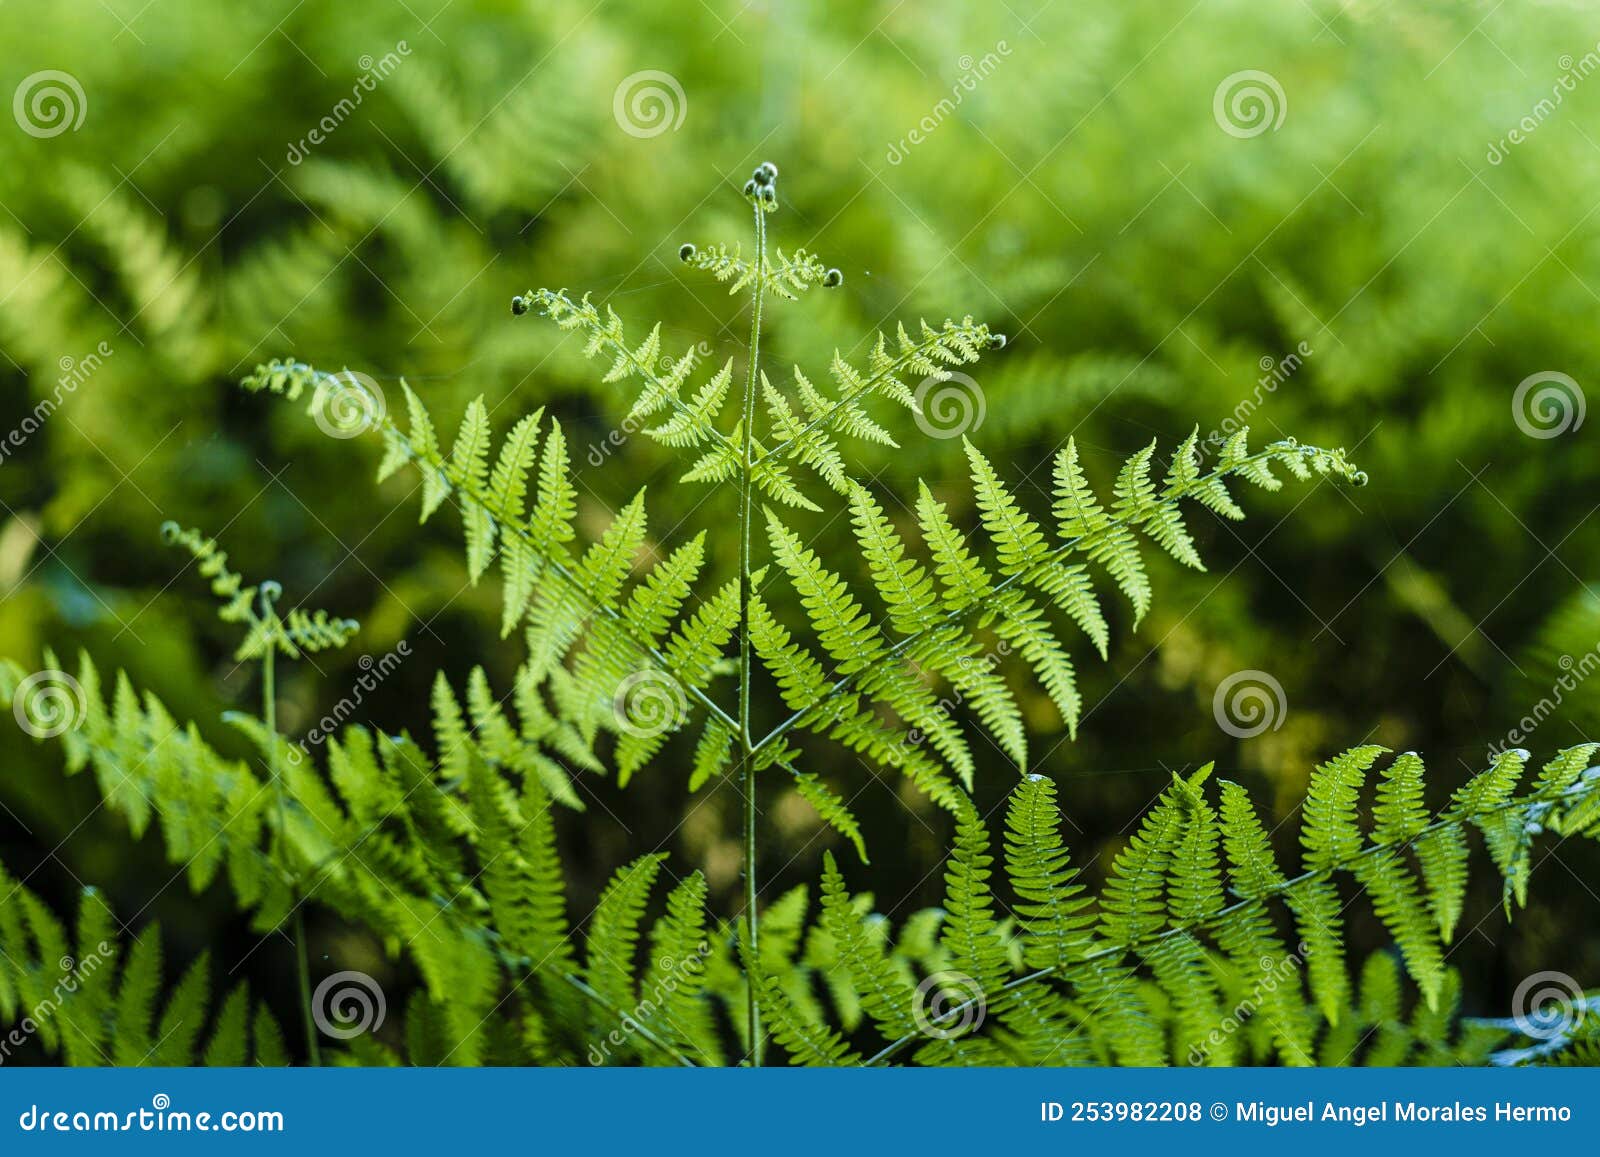 detail of a field of ferns in a rural area of galicia spain